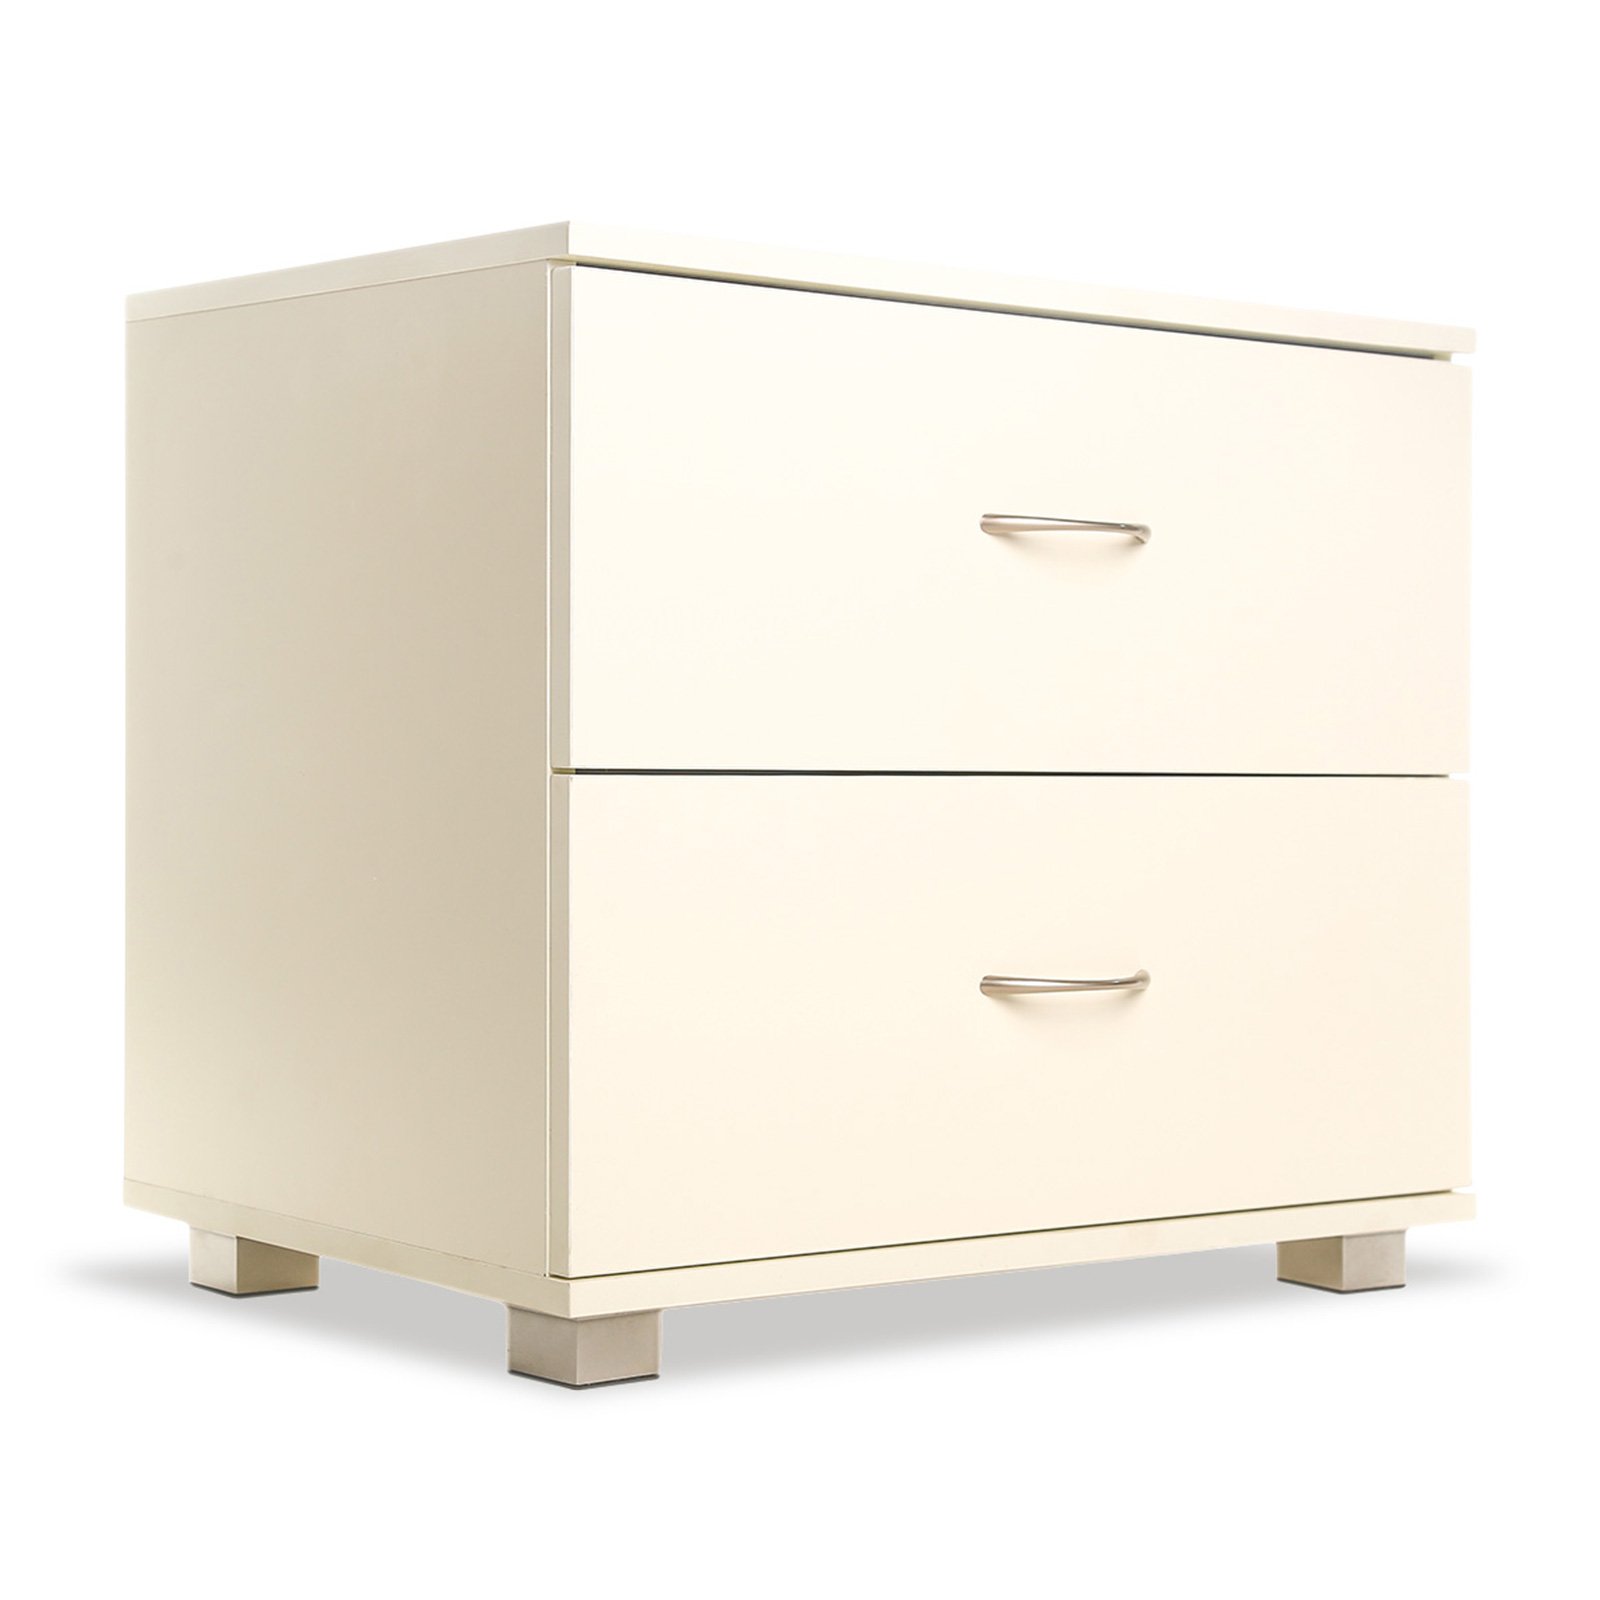 Bedside Table with Drawers MDF Cabinet Storage - White 2